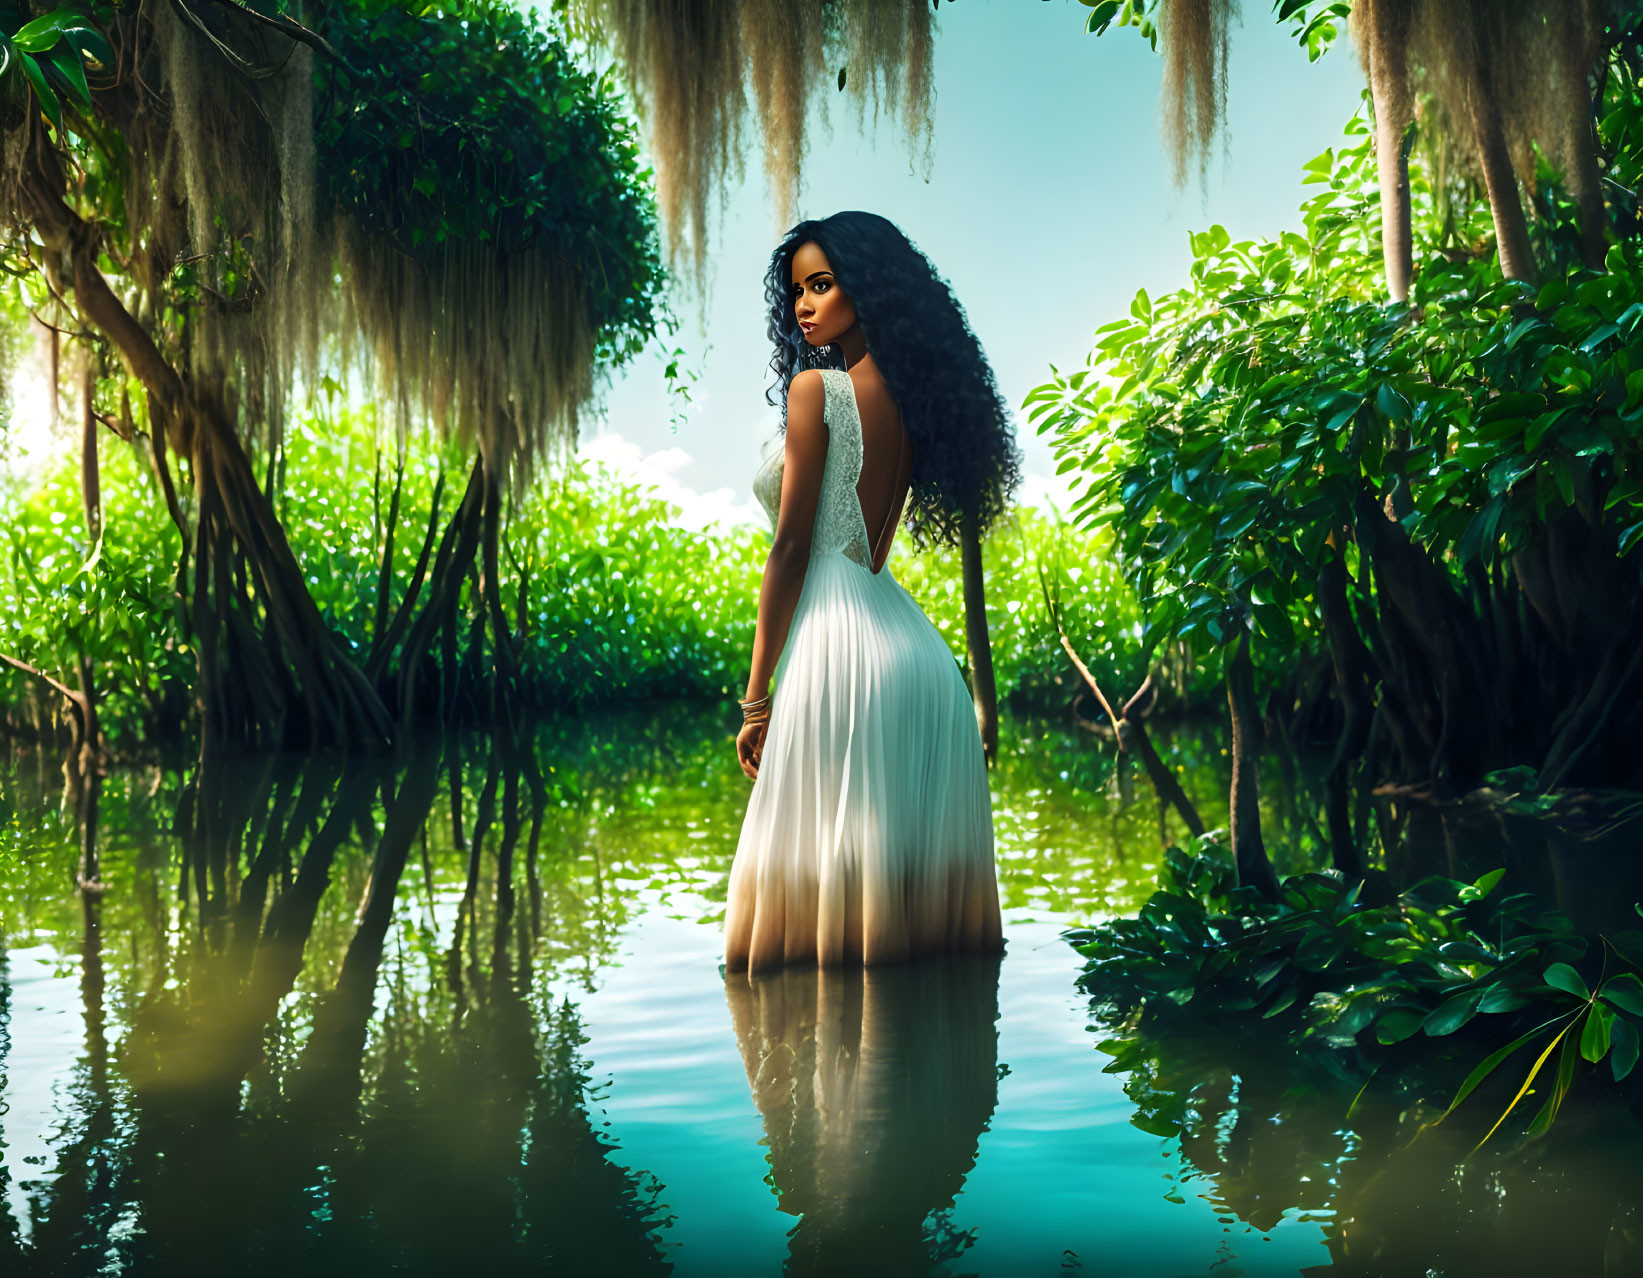 Woman in white dress standing in tranquil waters surrounded by lush greenery and hanging moss.